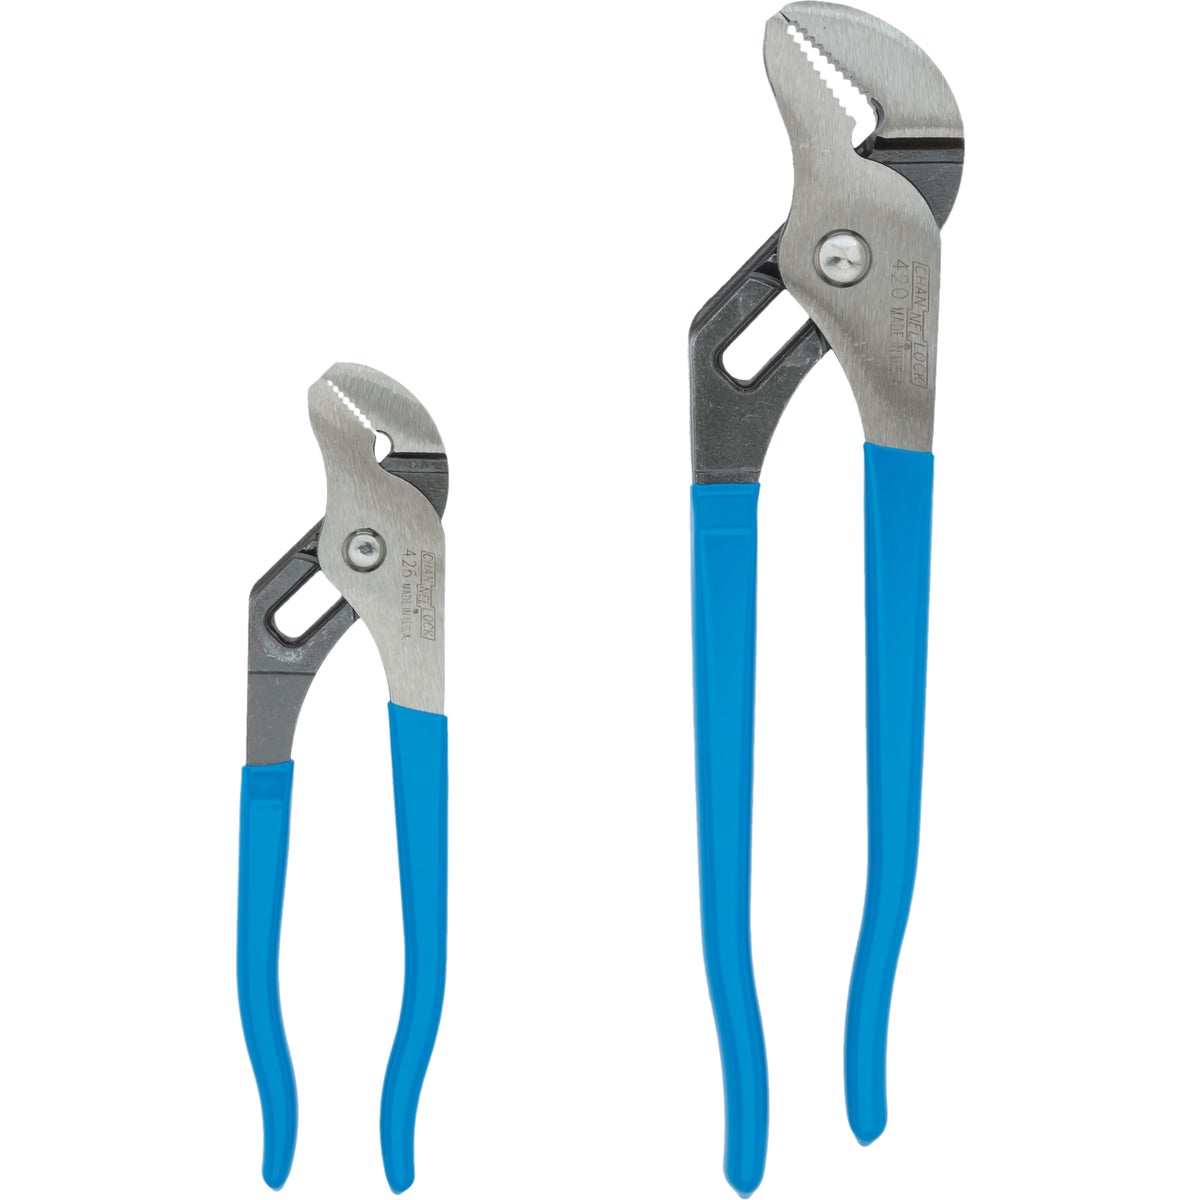 Channellock 6-1/2 In. and 9-1/2 In. Groove Joint Plier Set (2-Piece)